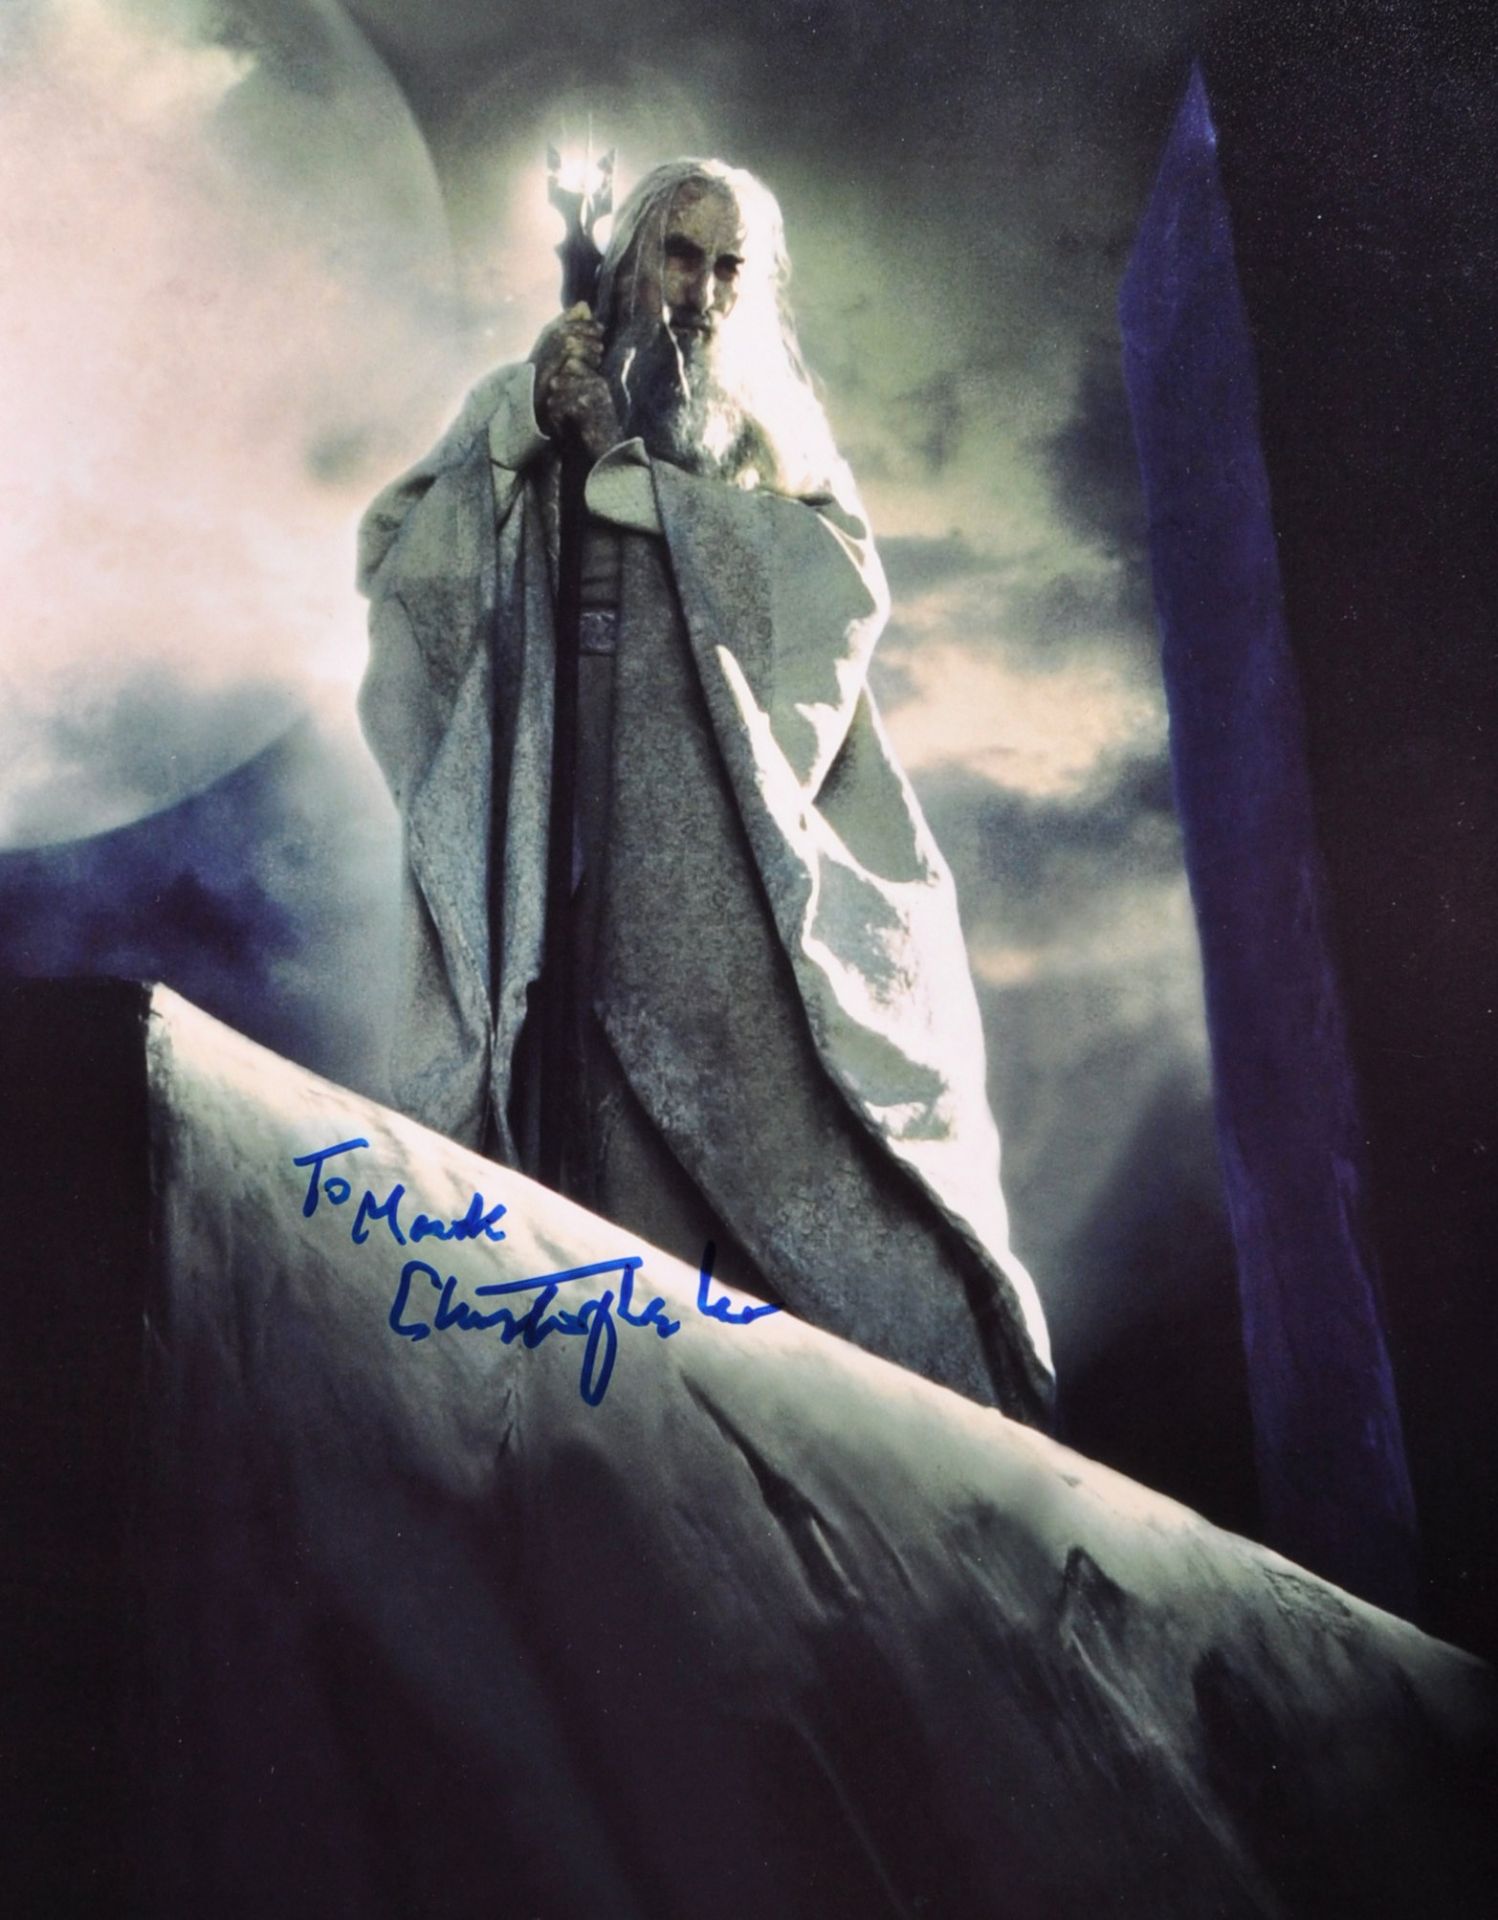 LORD OF THE RINGS - CHRISTOPHER LEE ( SARUMAN ) - SIGNED AUTOGRAPH